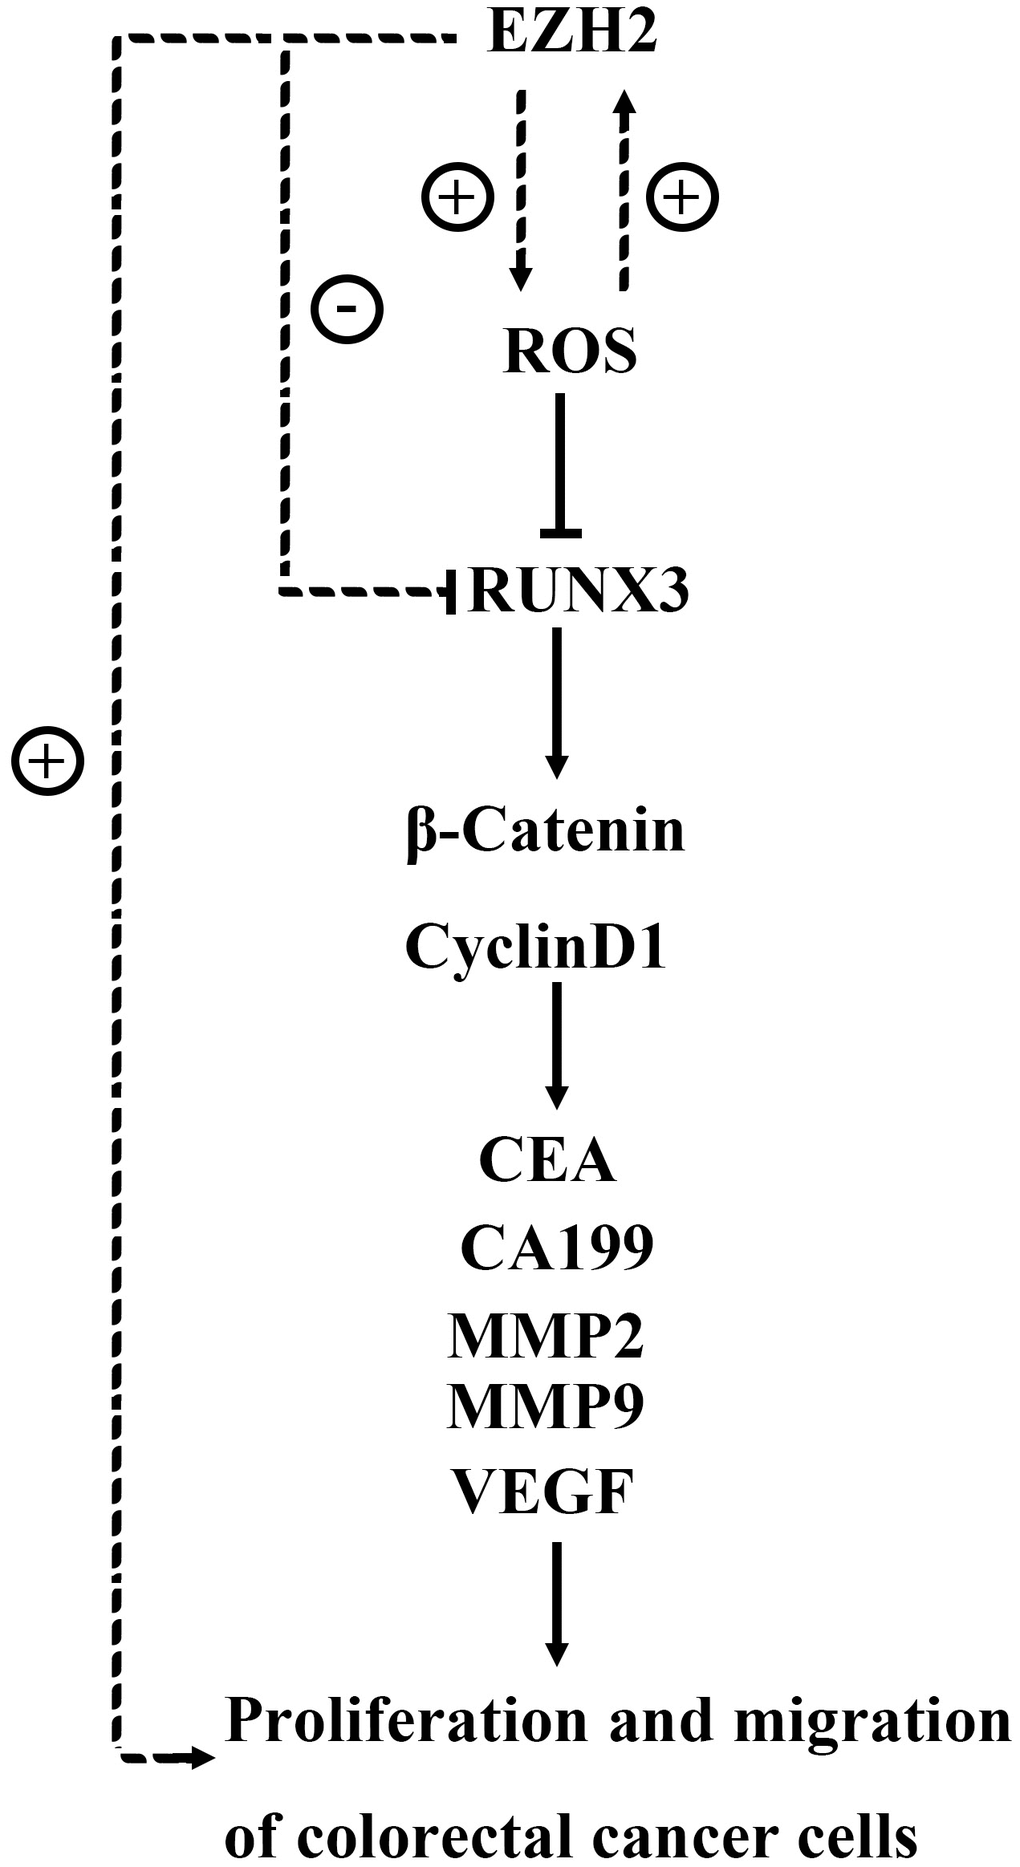 The EZH2 gene may target regulatory RUNX3 regulation via the Wnt/β-catenin signaling pathway, thereby affecting the proliferation, apoptosis, migration, and invasion of colon cancer cells.